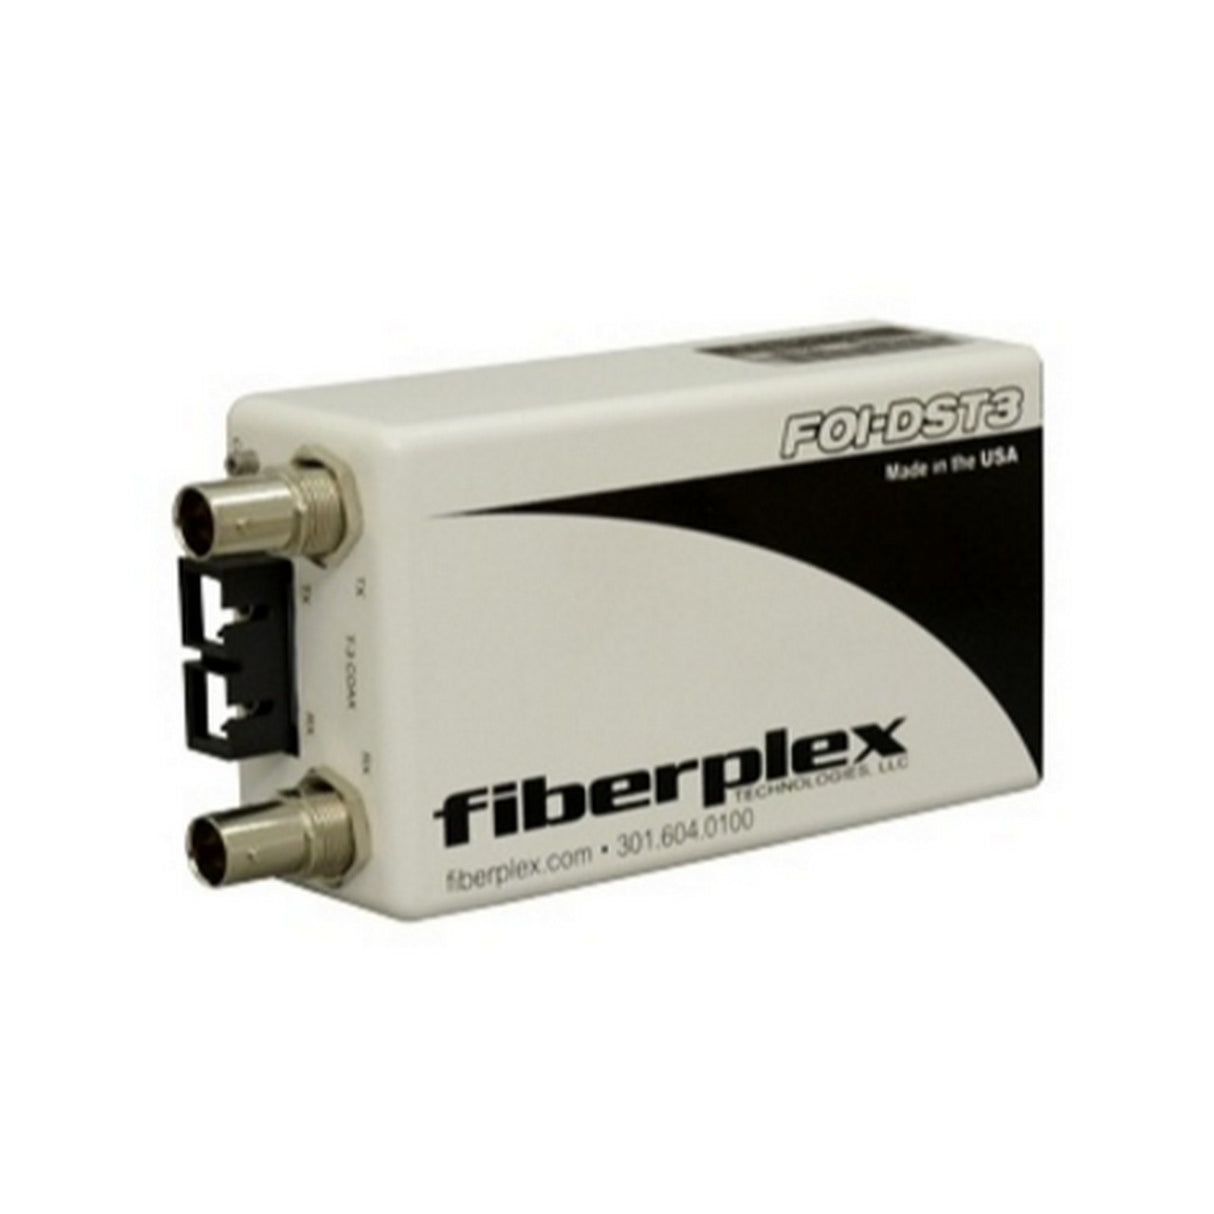 fiberplex FOI-DST3-RS-ST | Isolator for T3 or DS3